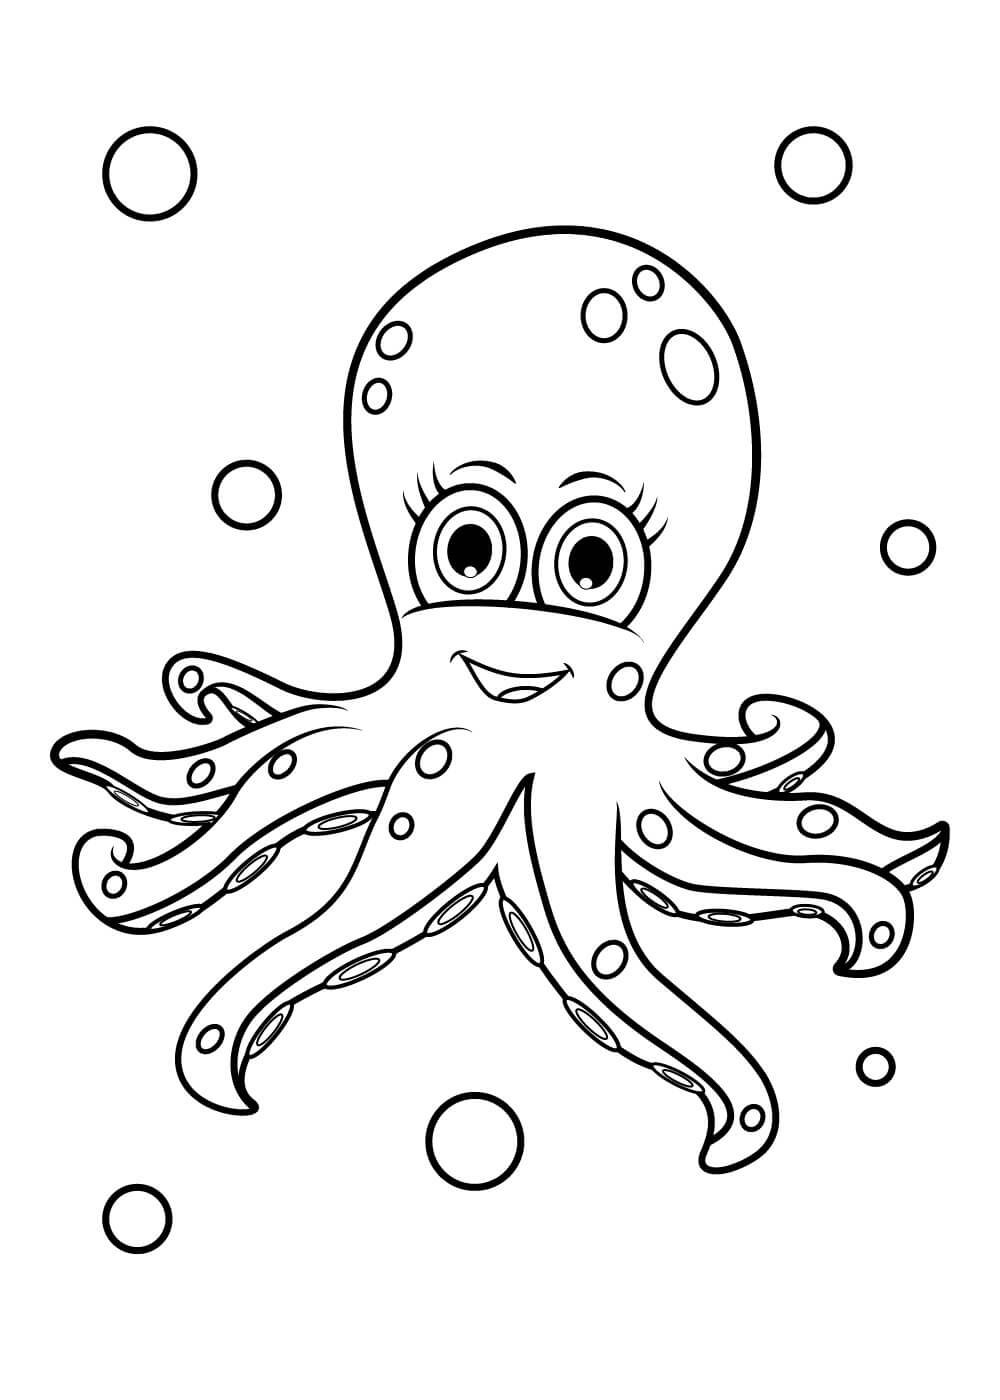 fun-octopus-coloring-page-download-print-or-color-online-for-free